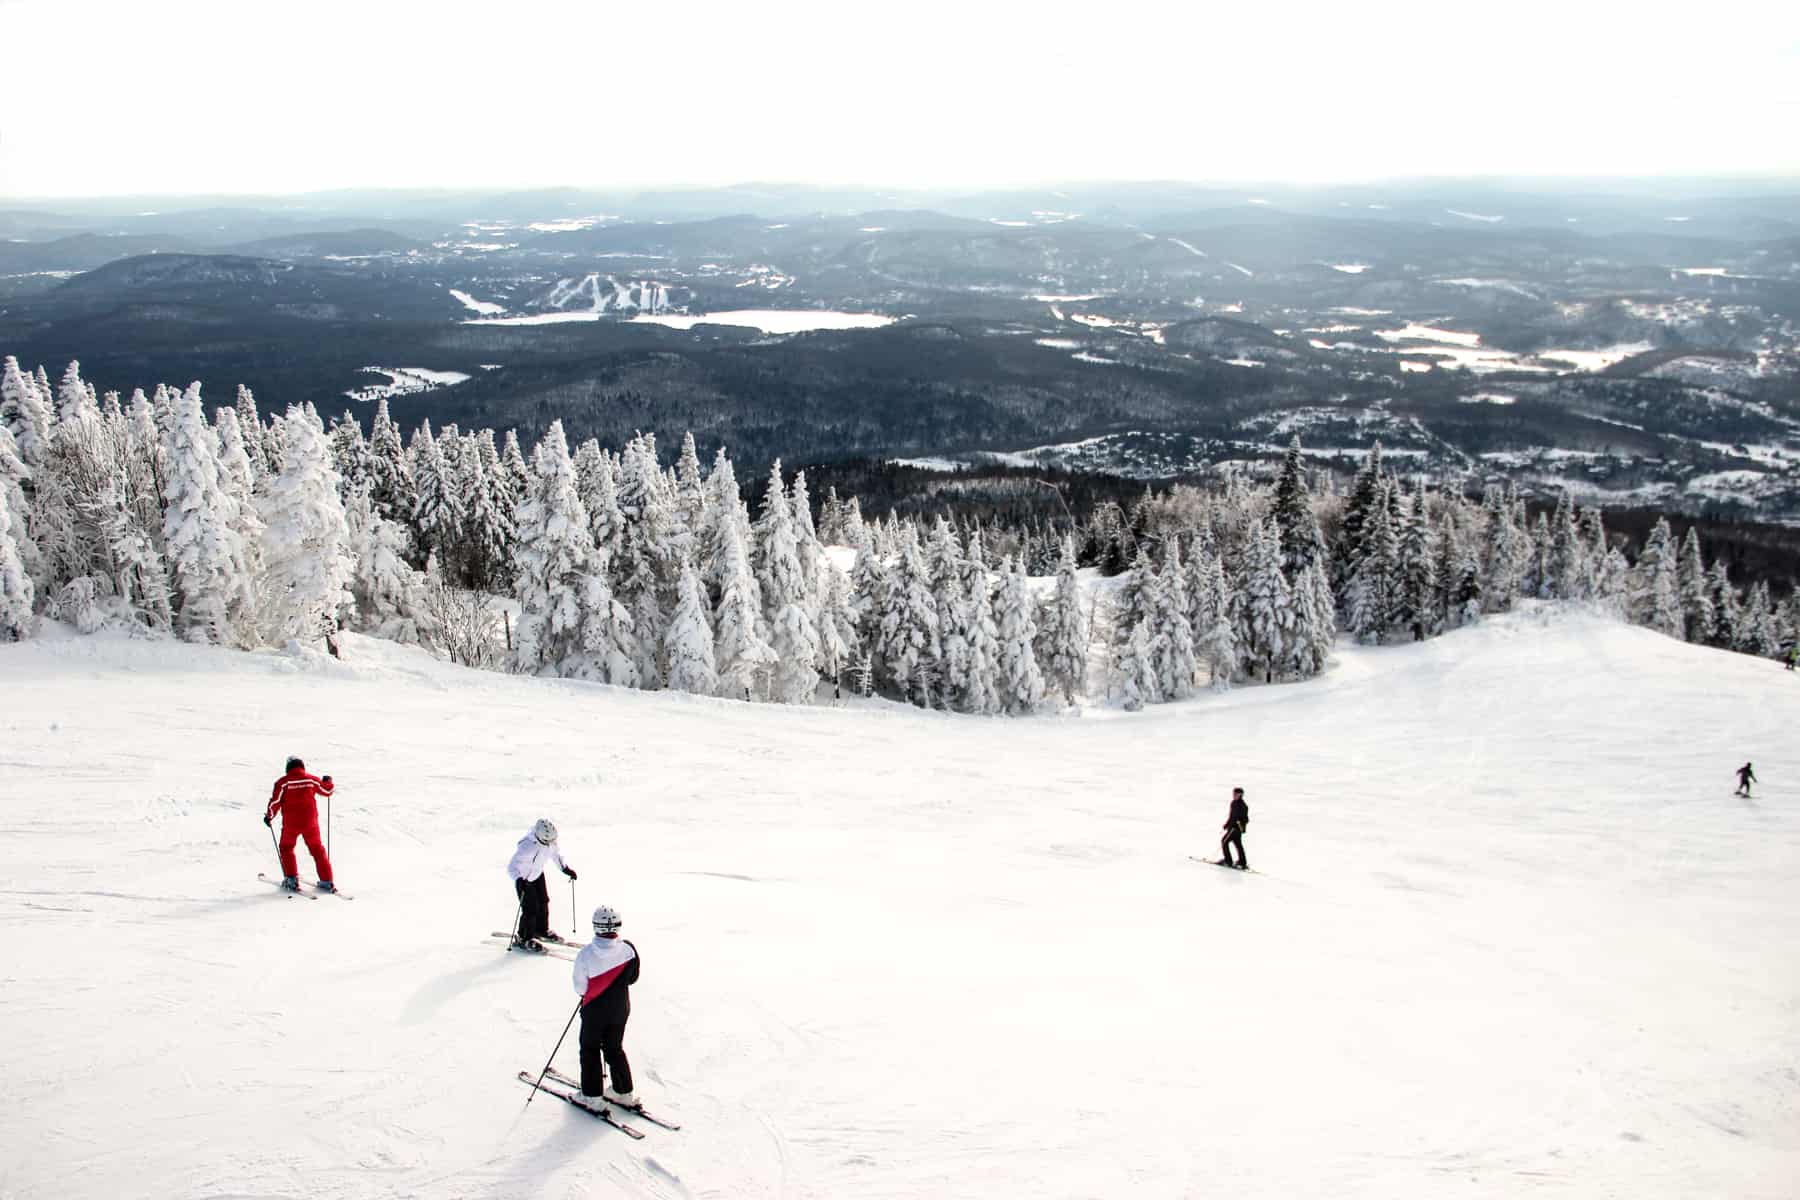 Five skiers on a tree-lined slope at the Mont Tremblant ski resort in Canada in winter.